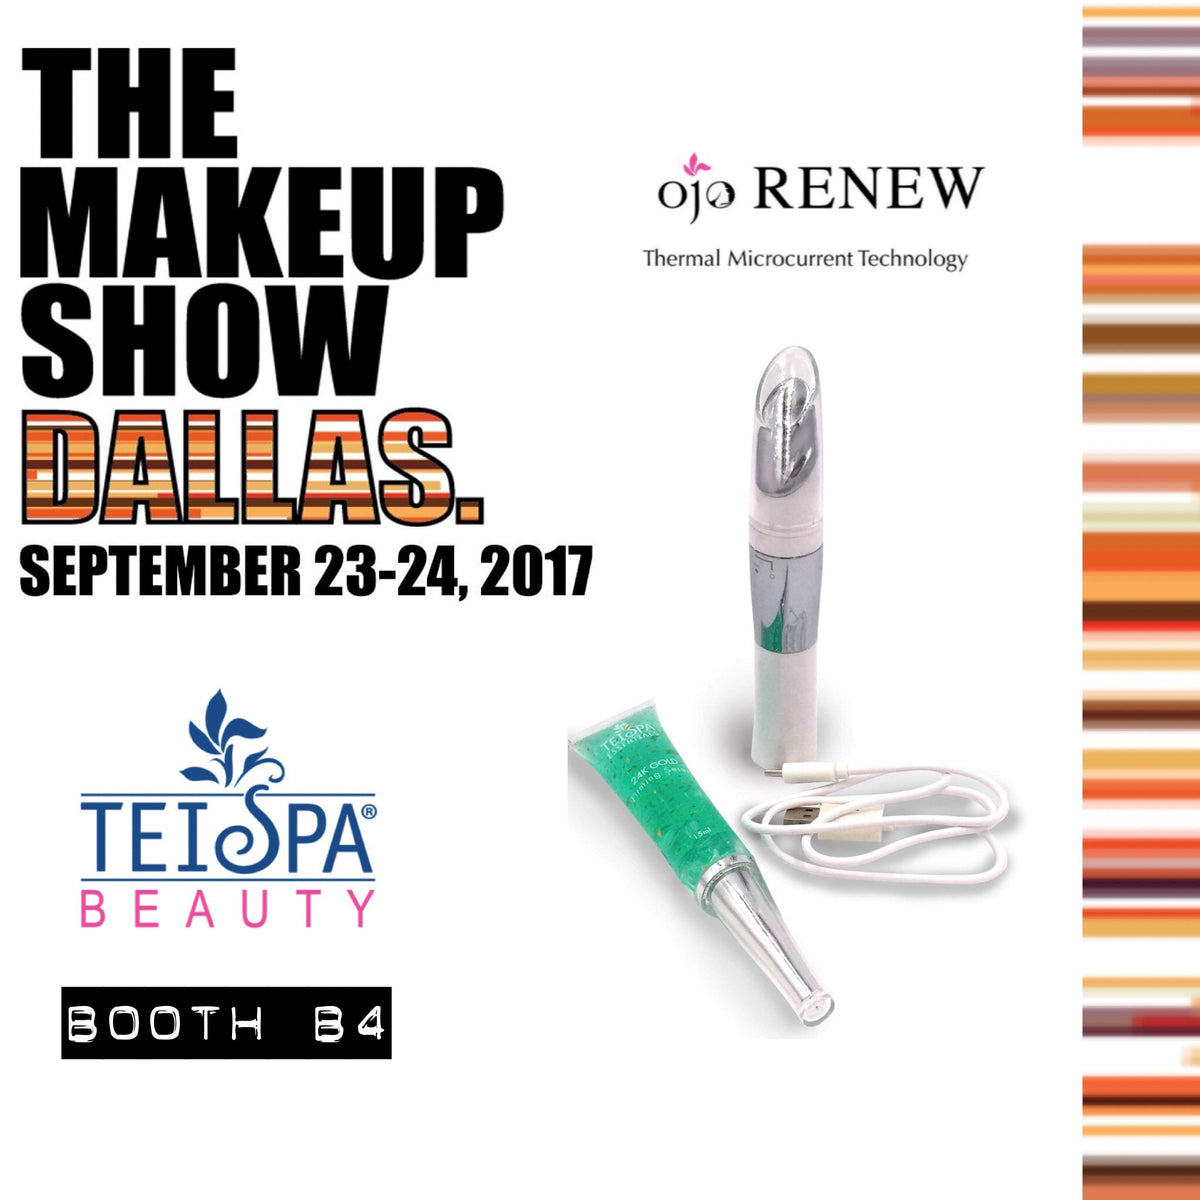 Hey Texas! We'll be @THEMAKEUPSHOW IN DALLAS - BOOTH B4  -